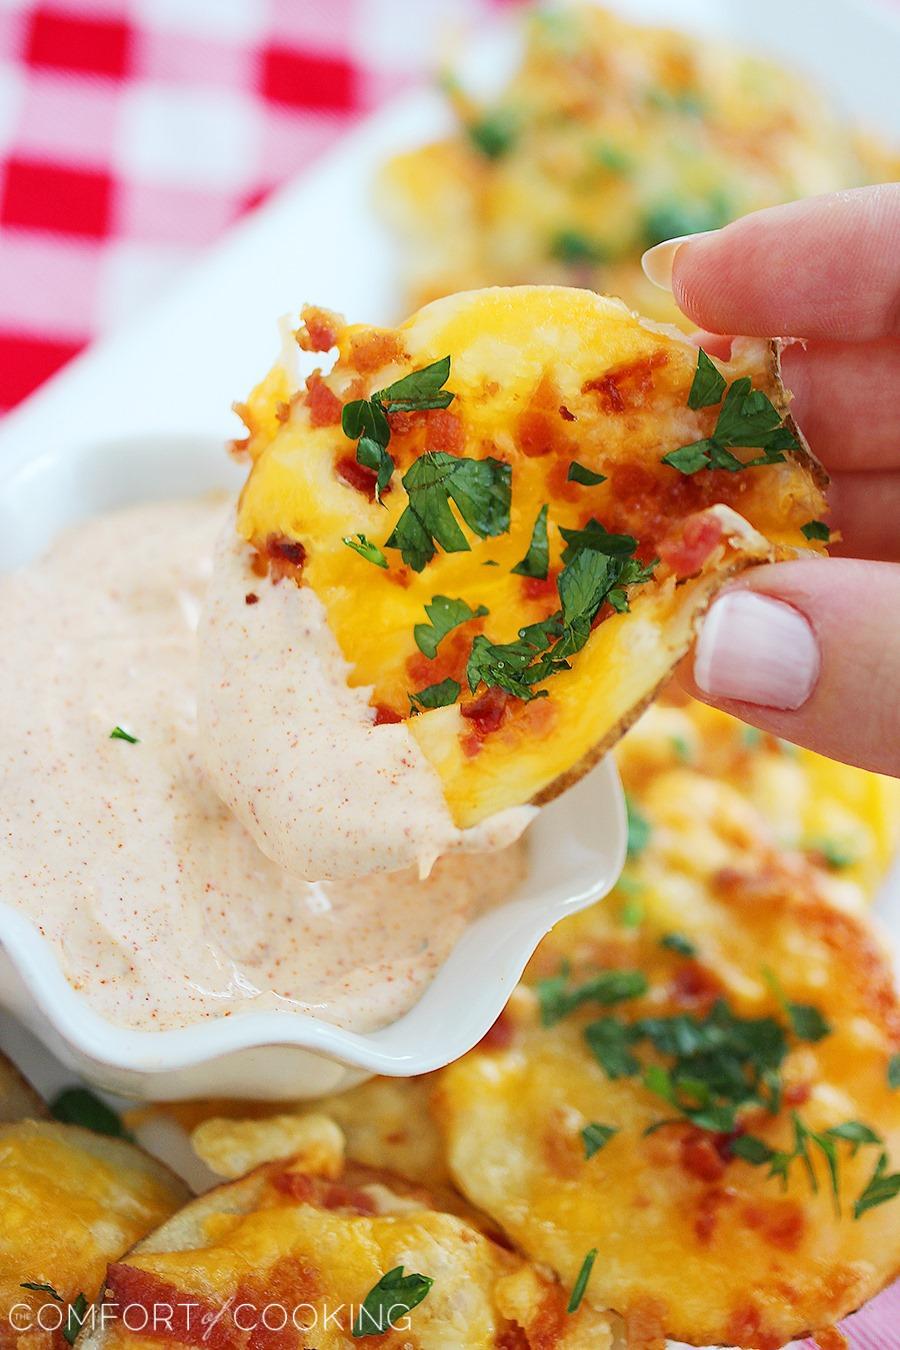 Cheesy Bacon Oven Chips with Chipotle Ranch Dipping Sauce – These crispy, cheesy loaded baked potato chips are the perfect savory snack for parties! | thecomfortofcooking.com